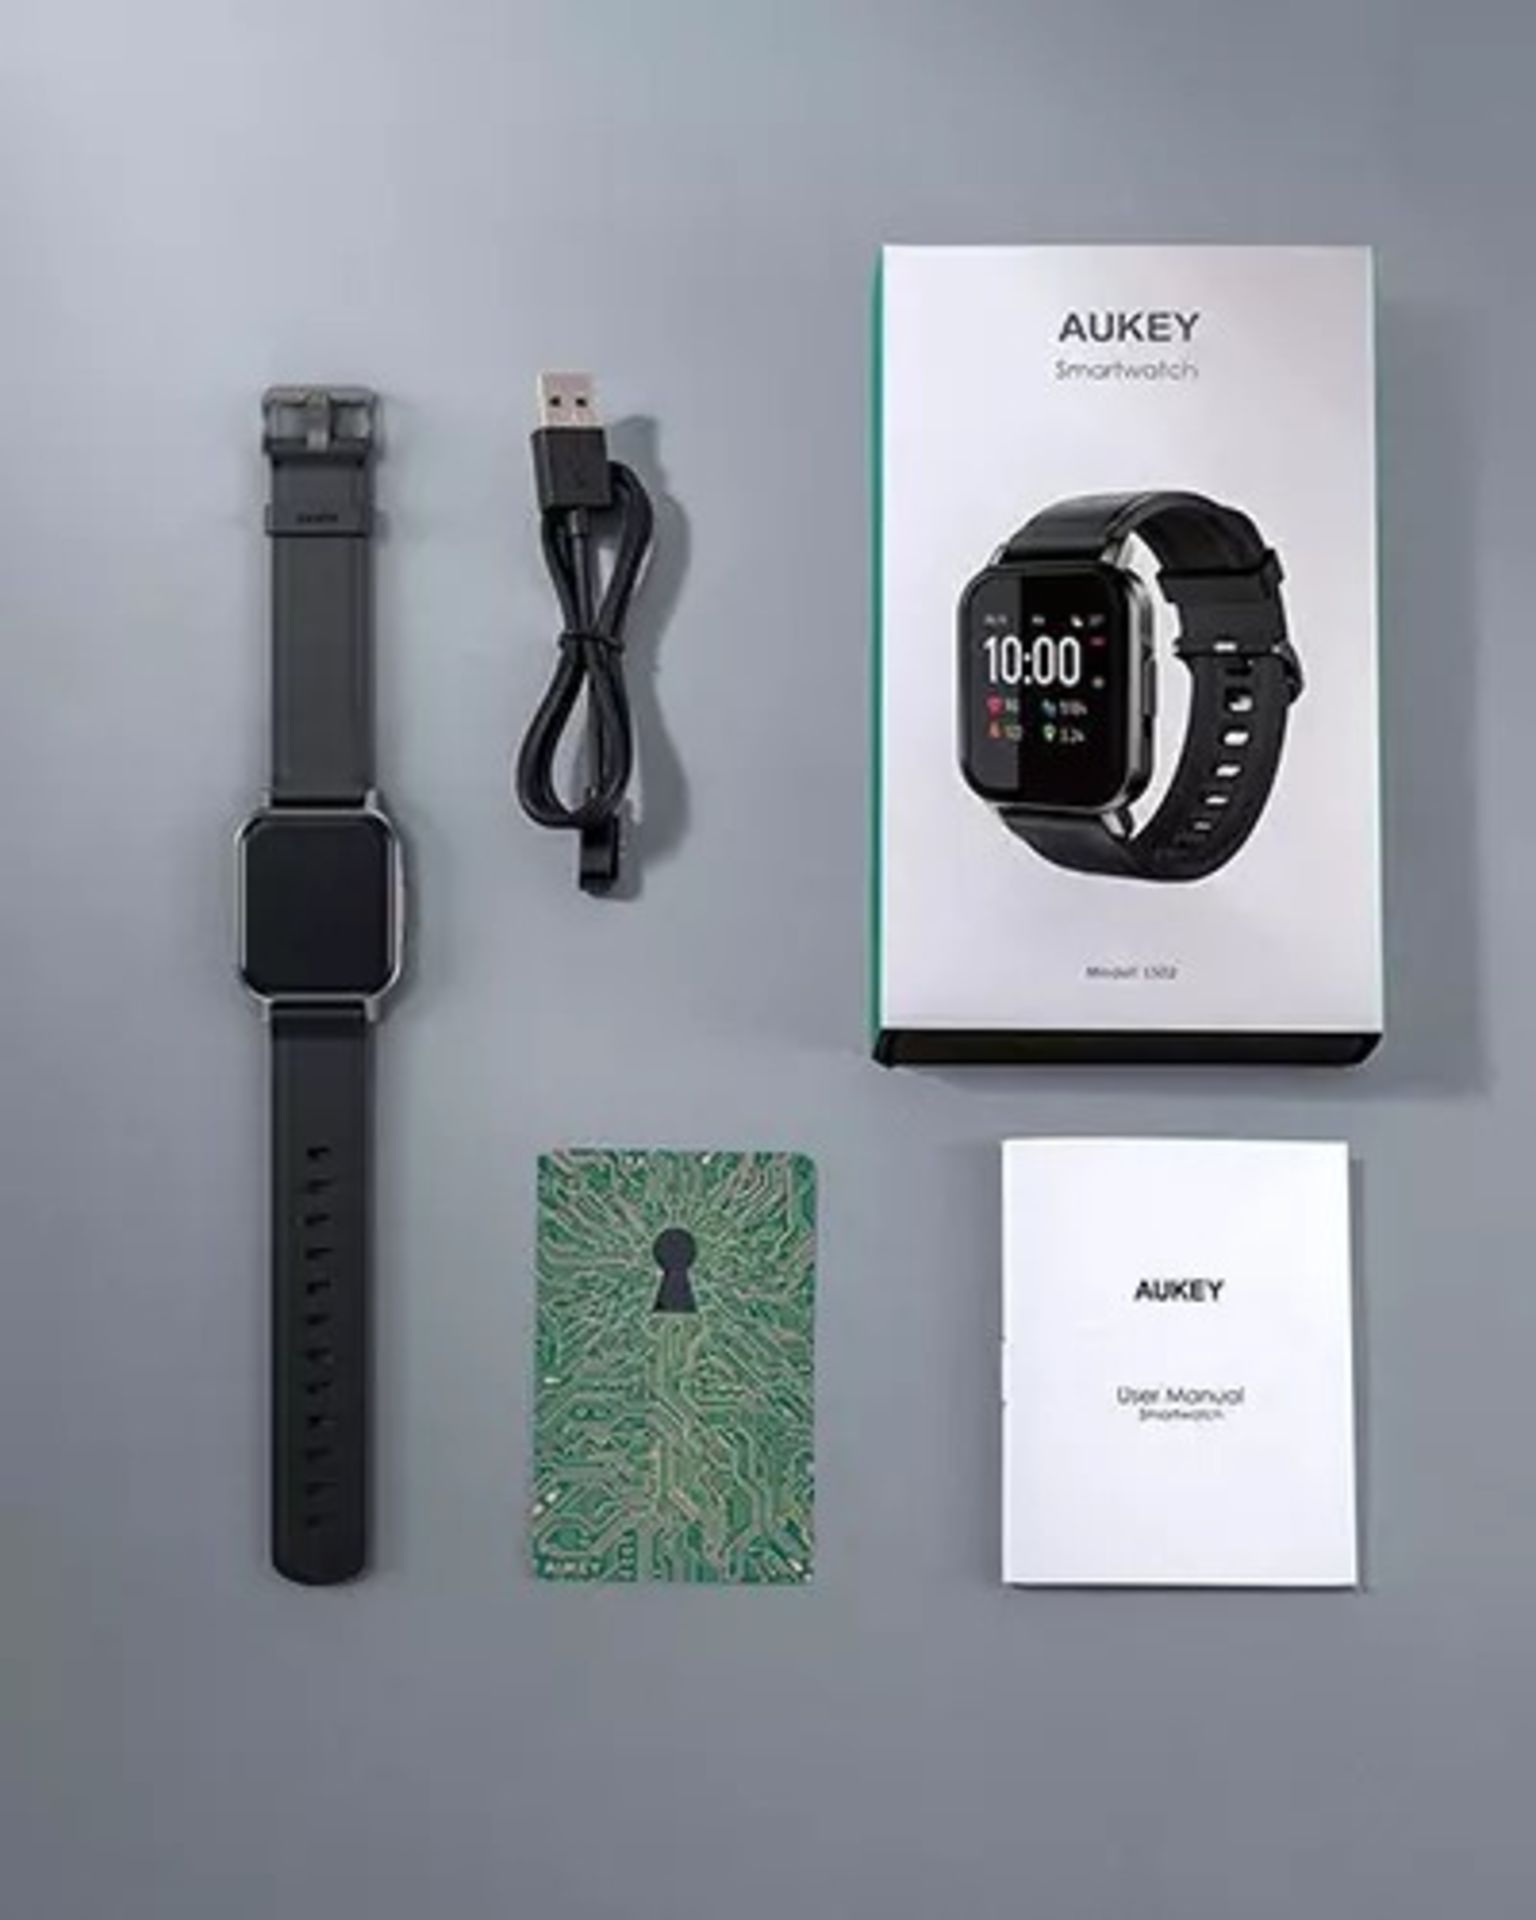 AUKEY LS02 SMART WATCHES X 100 RRP £1499.99